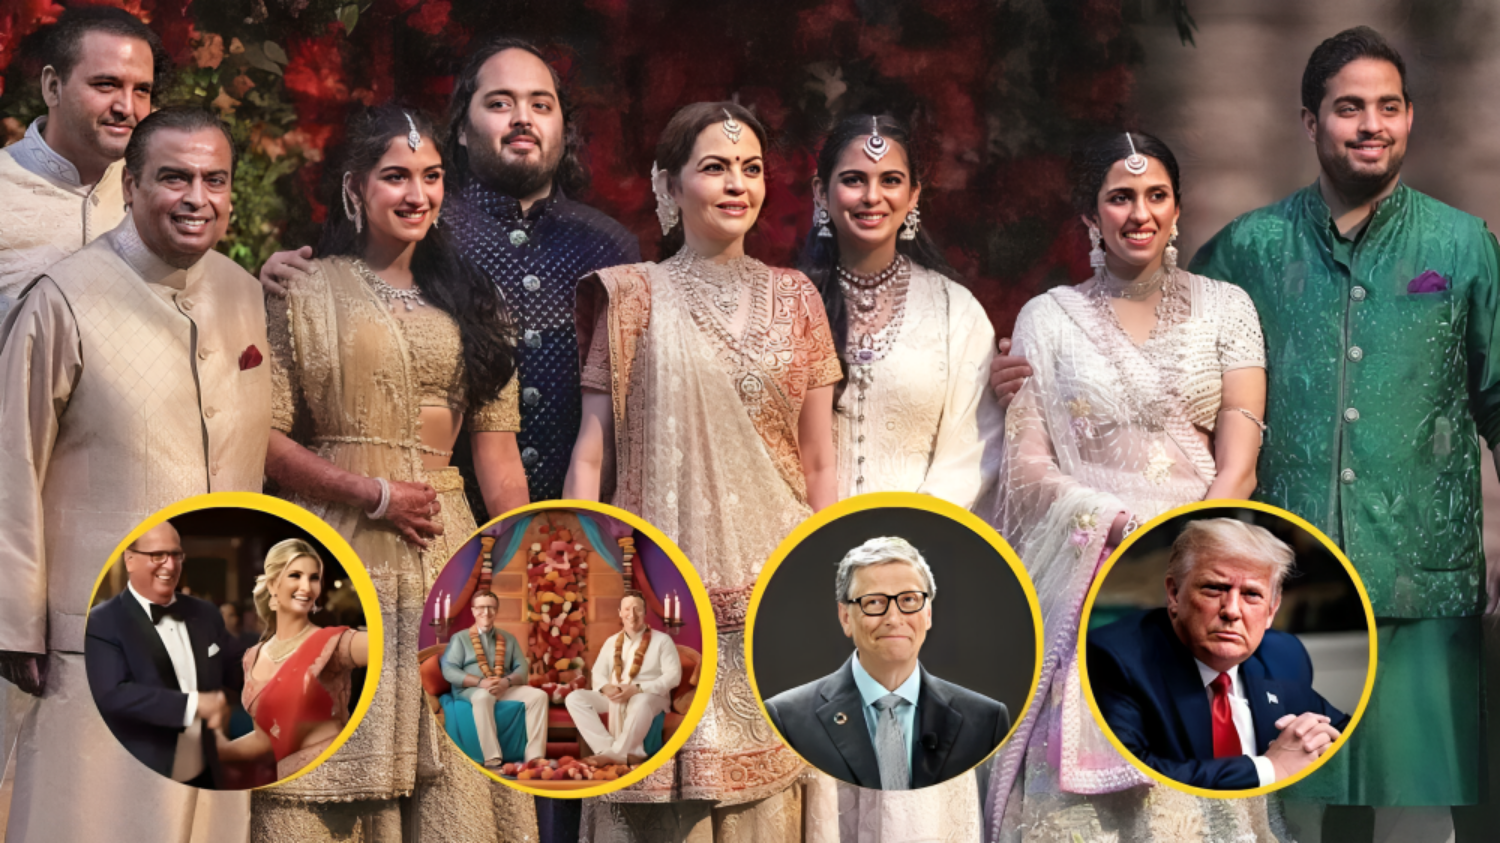 Picture of The VVVVIP guest list of Mukesh Ambani's son Anant Ambani's pre-wedding is out, the function will be held in this district of Gujarat